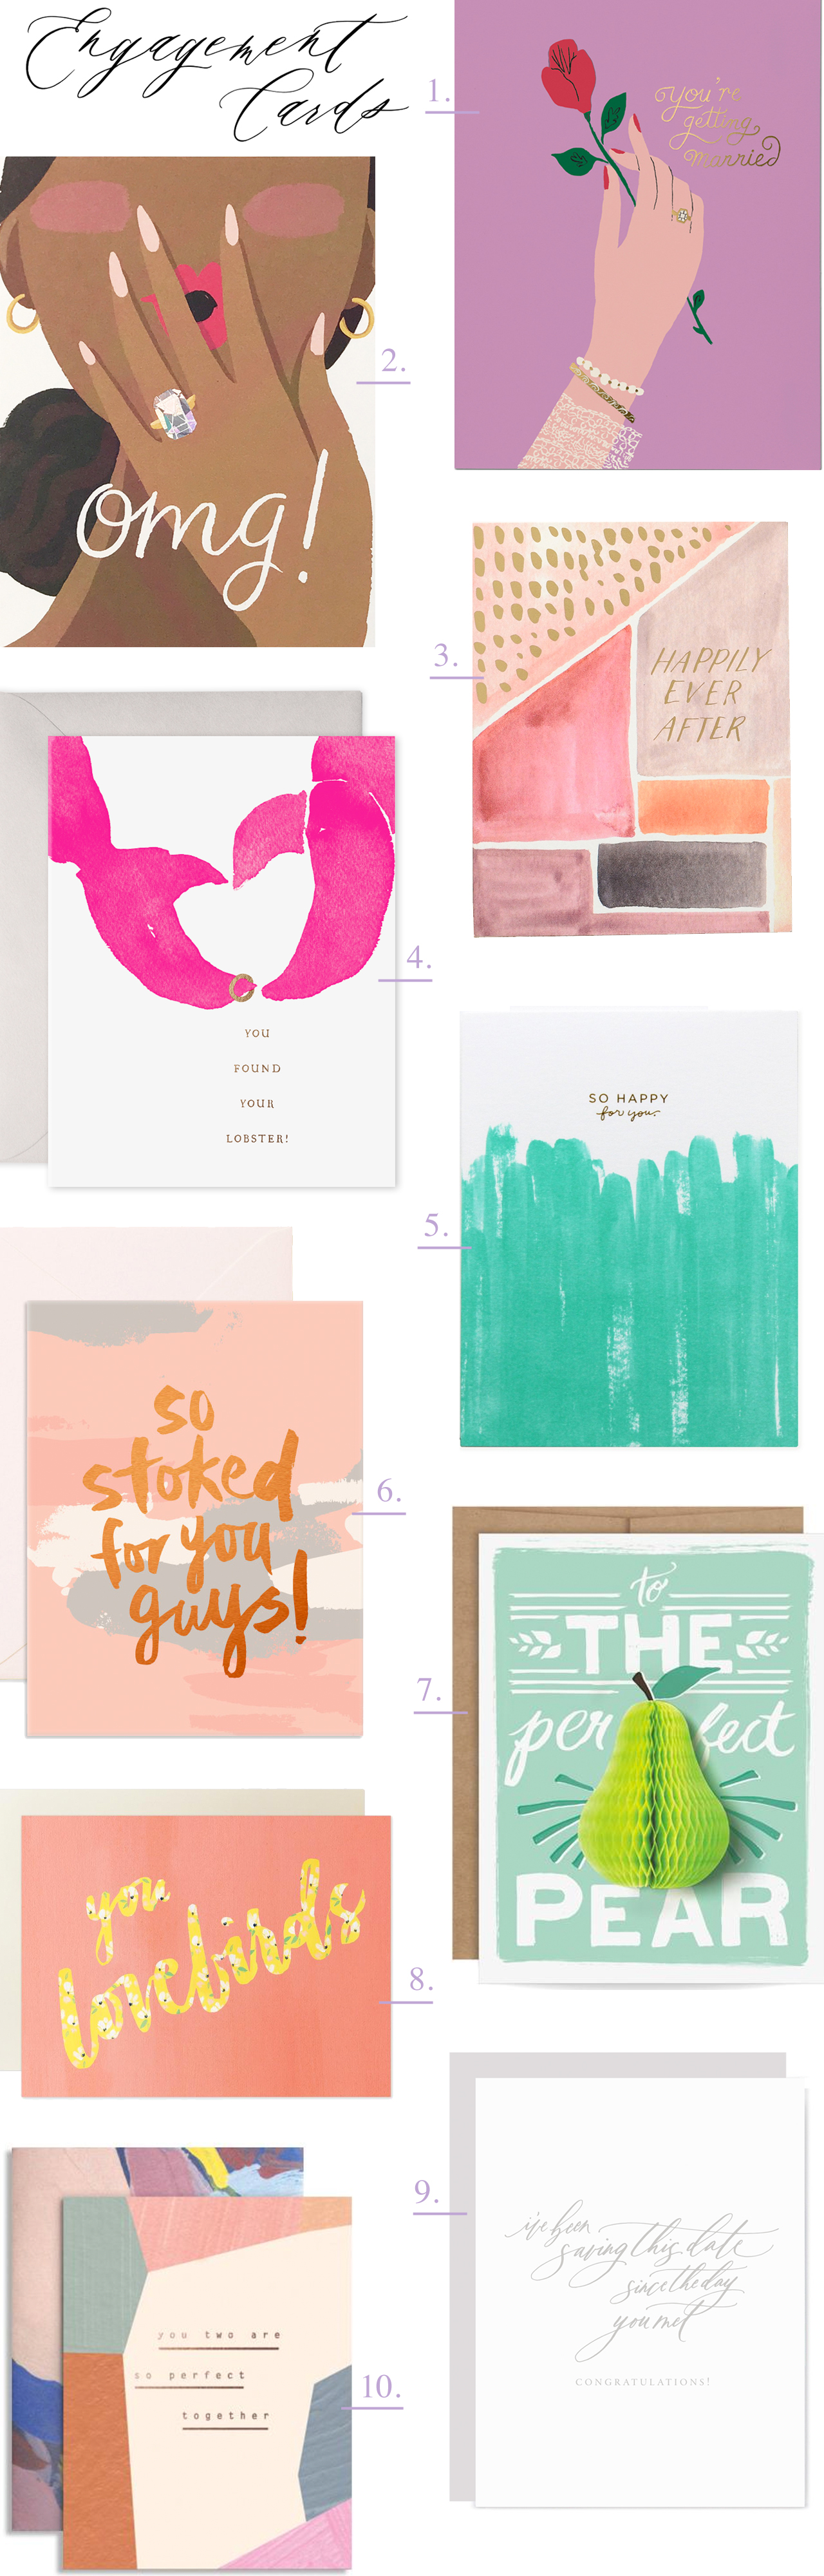 Ten Awesome Engagement Cards